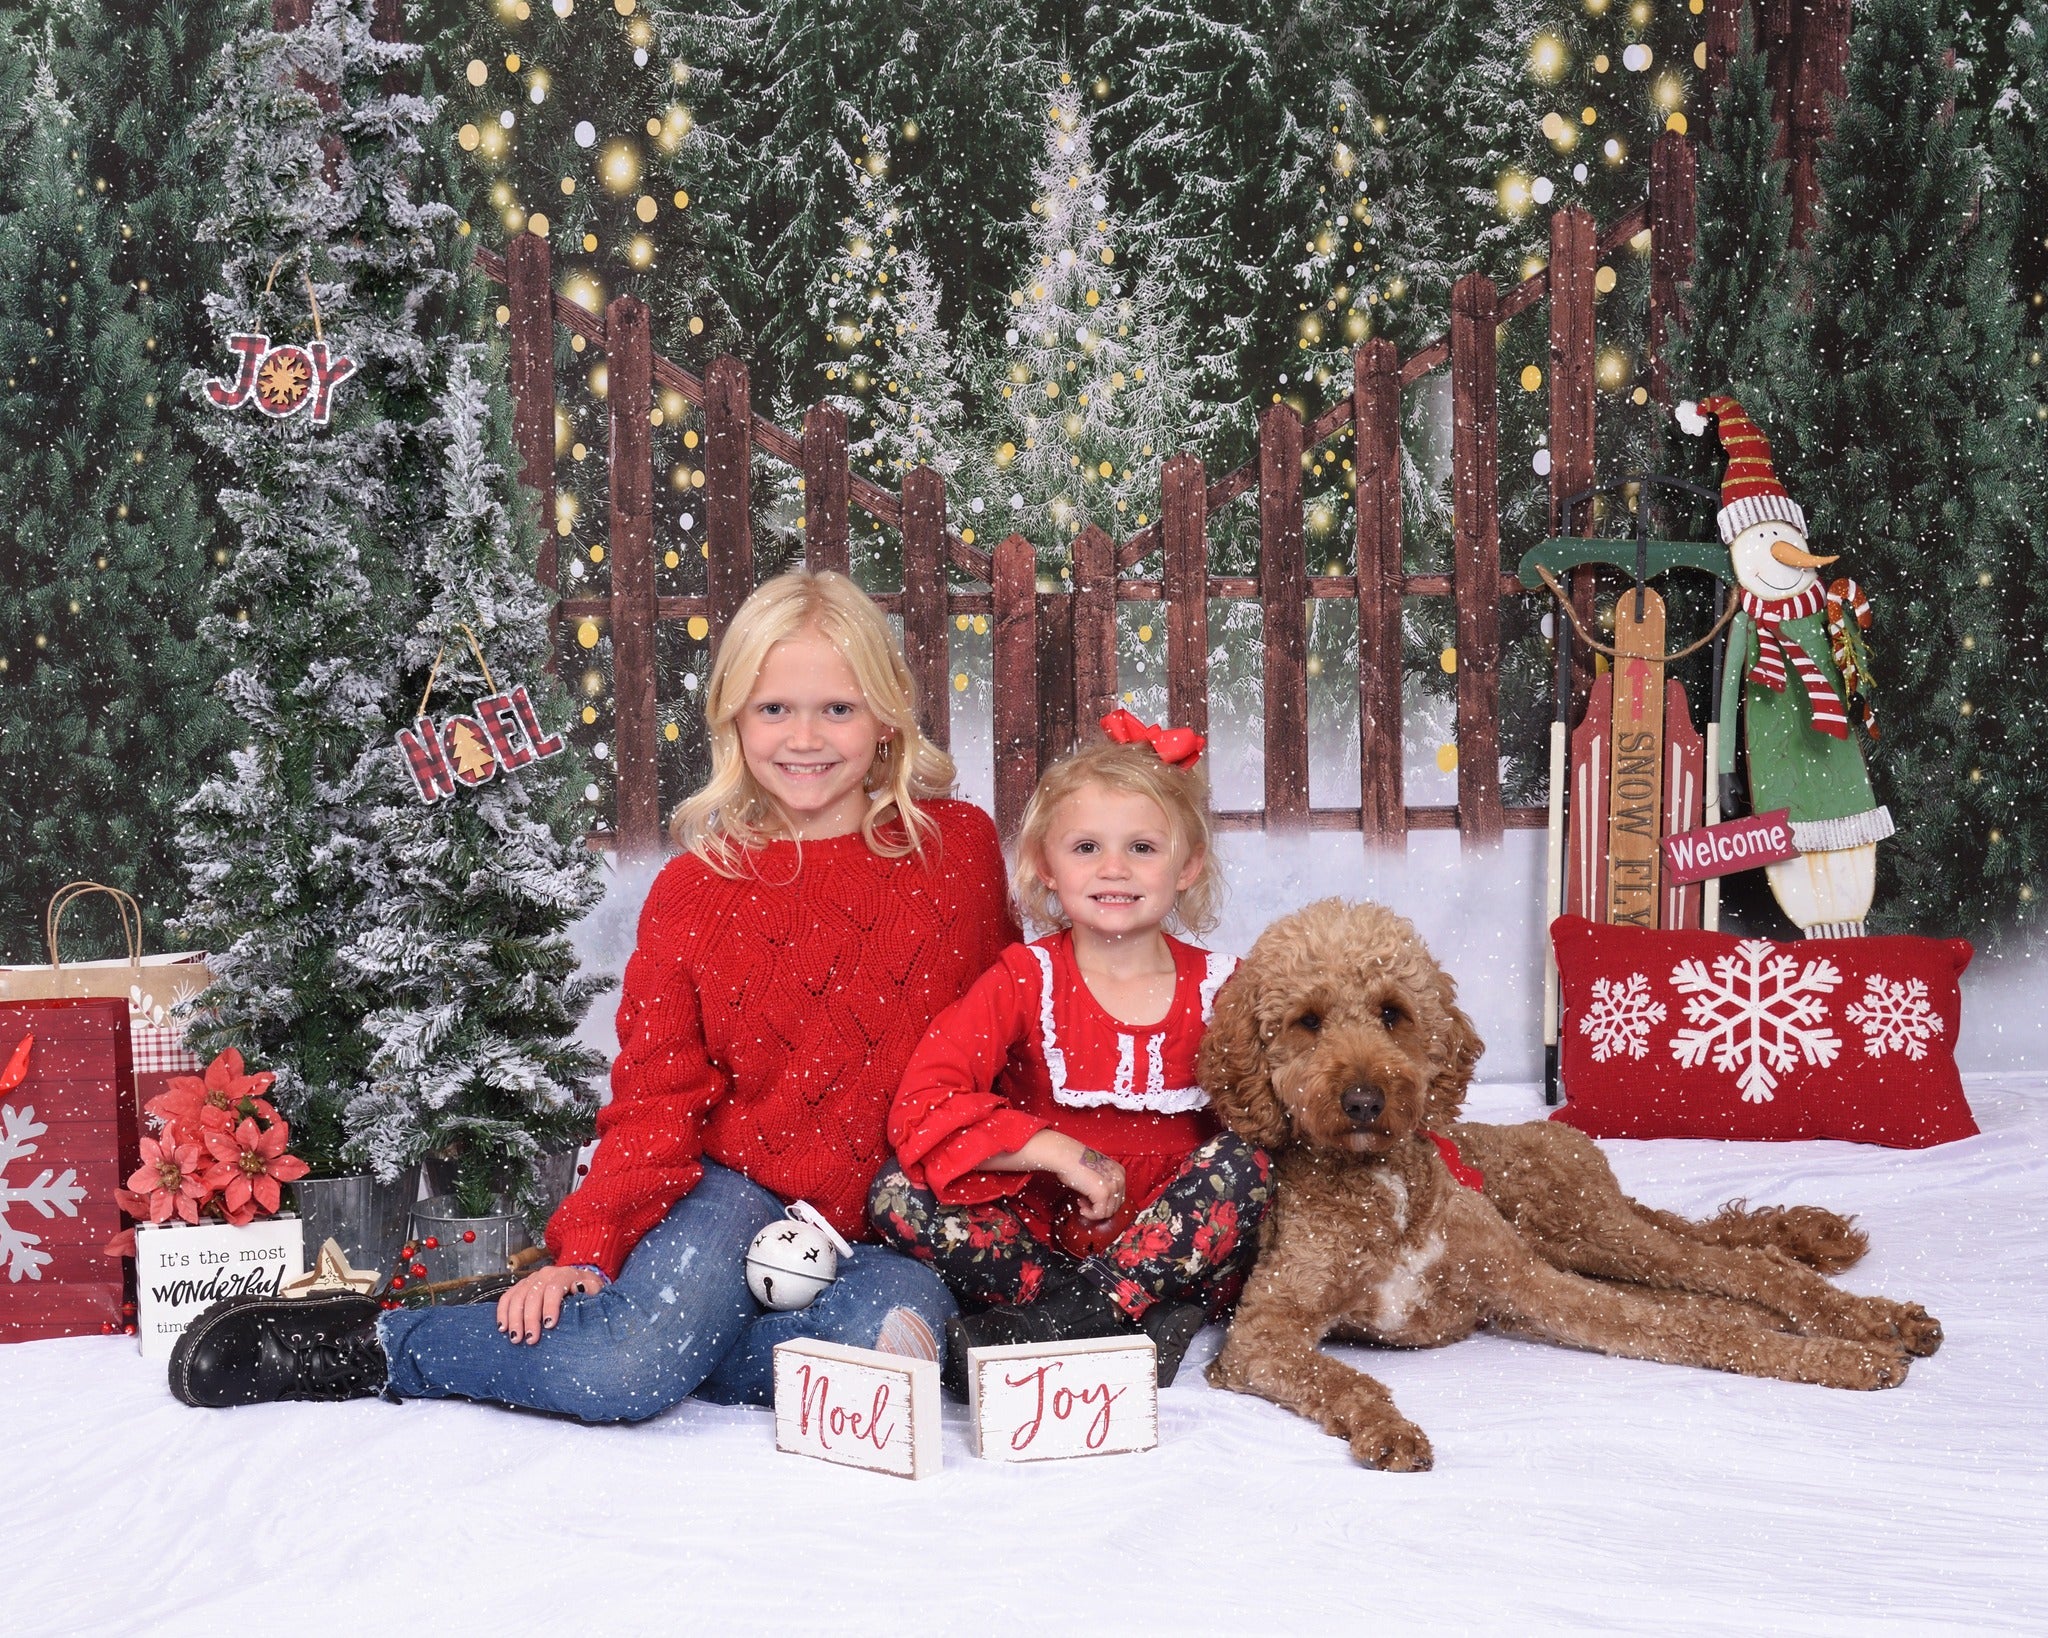 Kate Christmas Backdrop Tree Farm Fence Outdoor for Photography